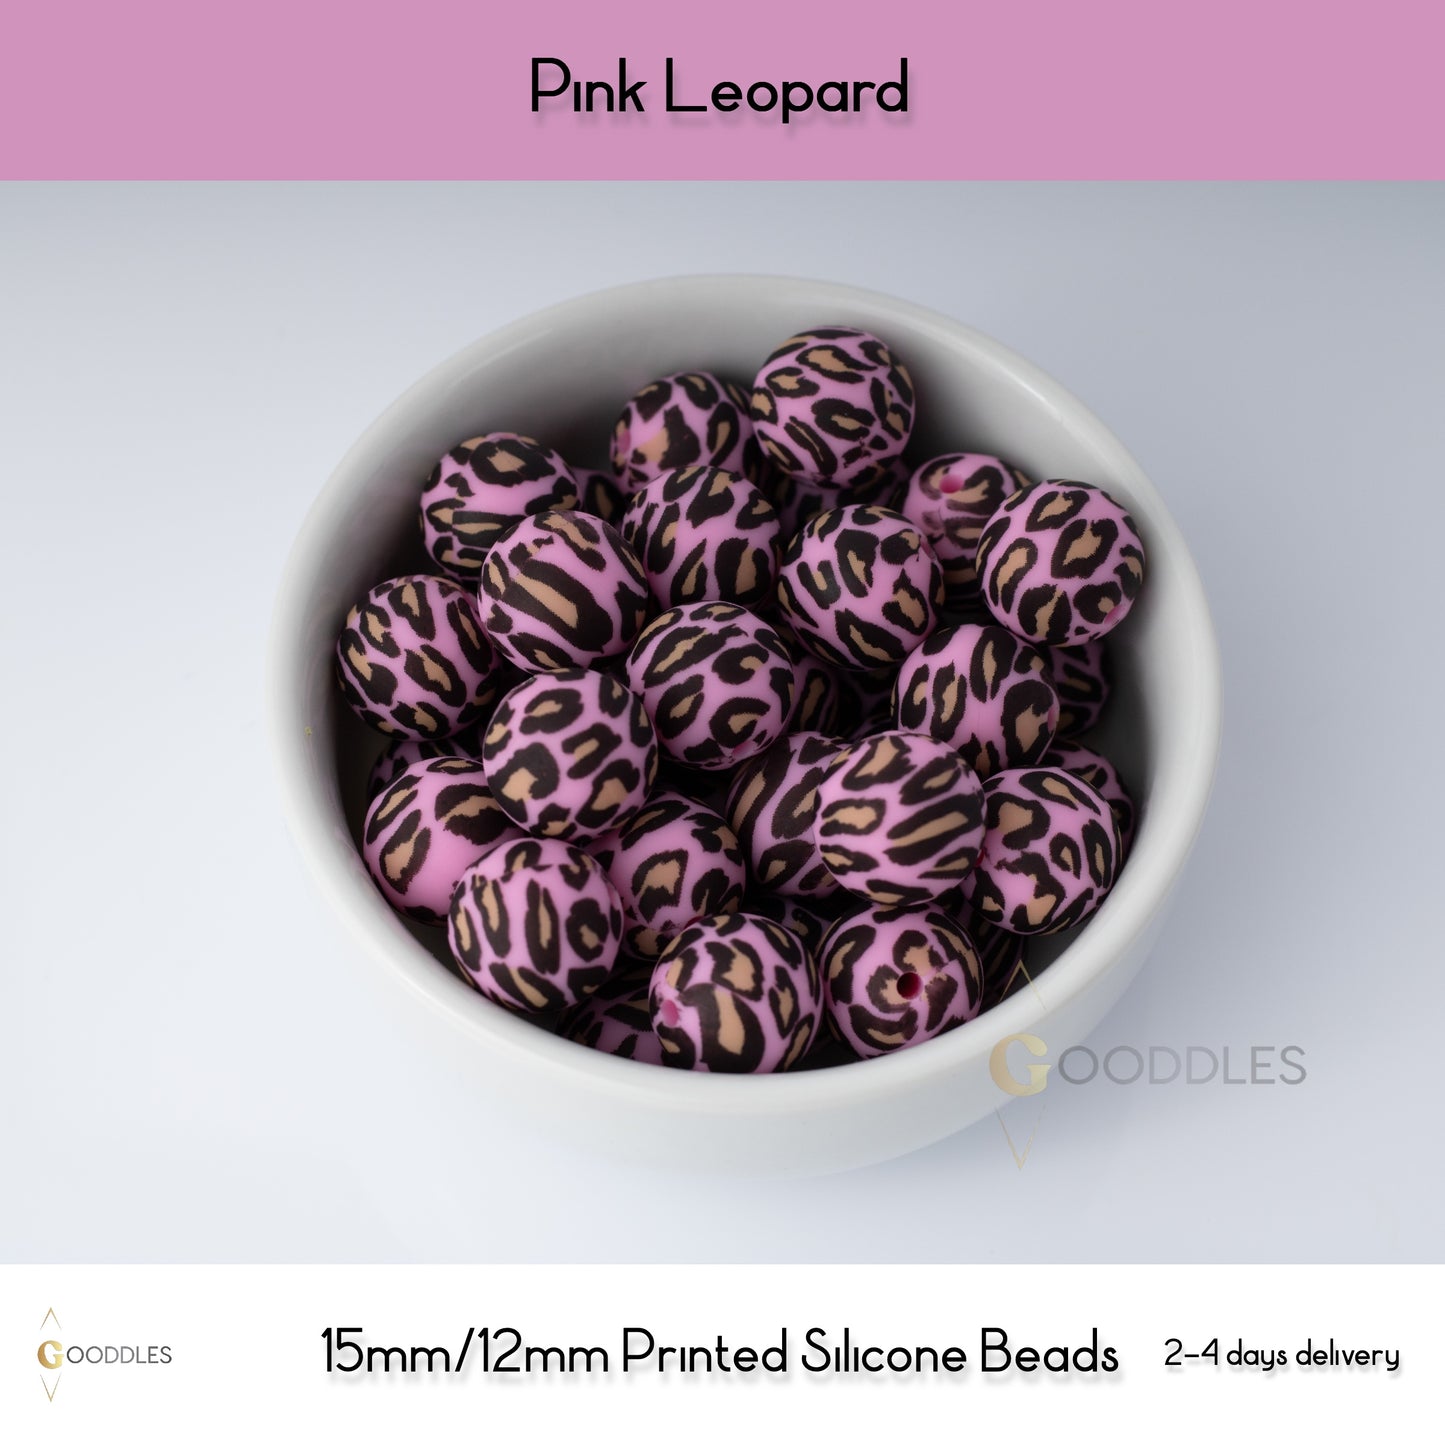 5pcs, Pink Leopard Silicone Beads Printed Round Silicone Beads